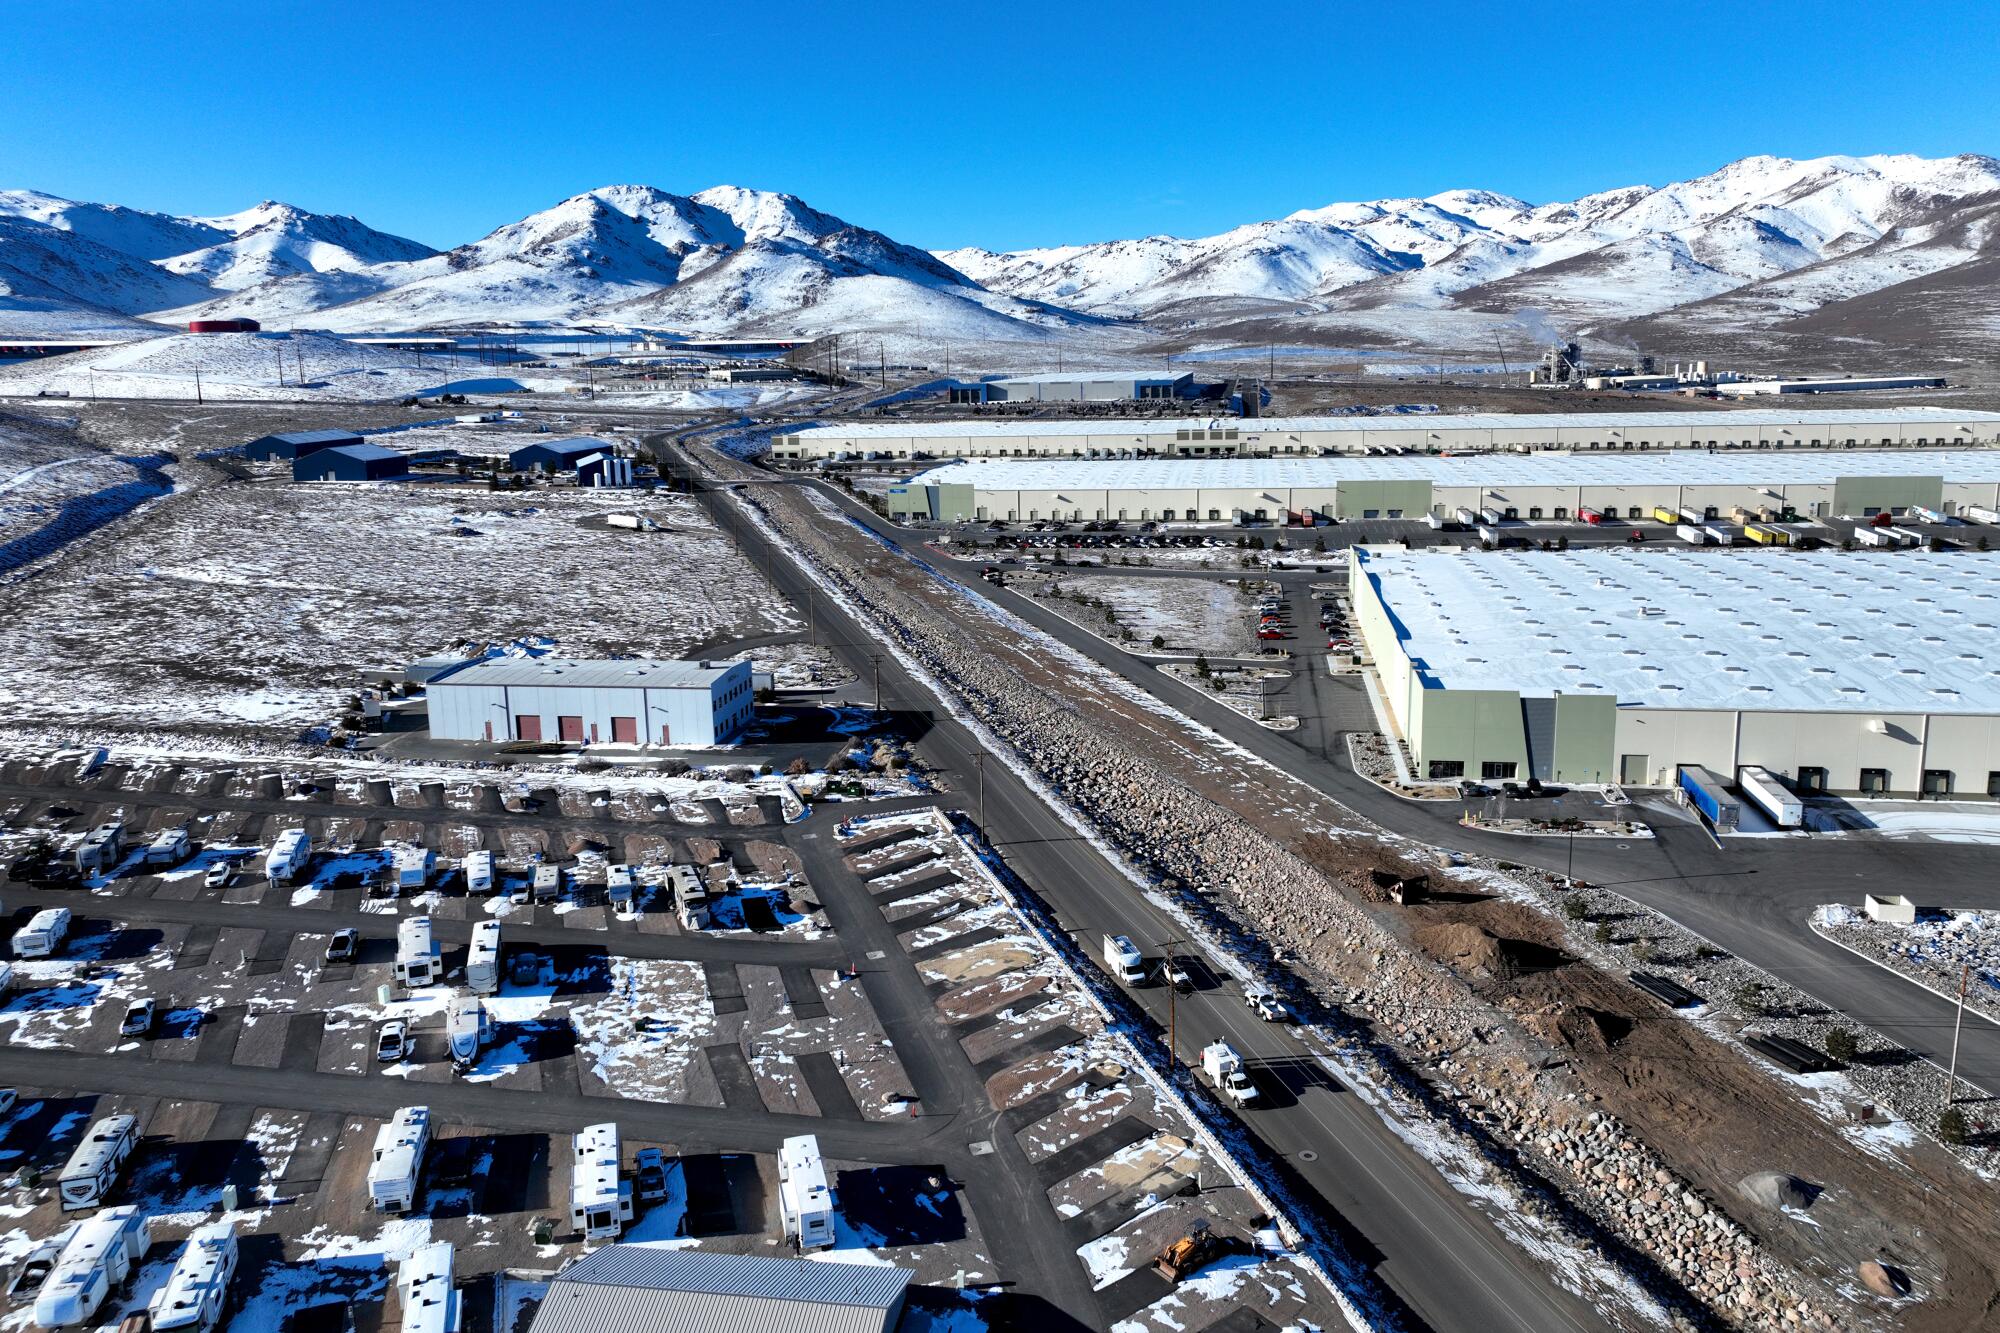 Warehouses and parking areas next to snowy mountains.